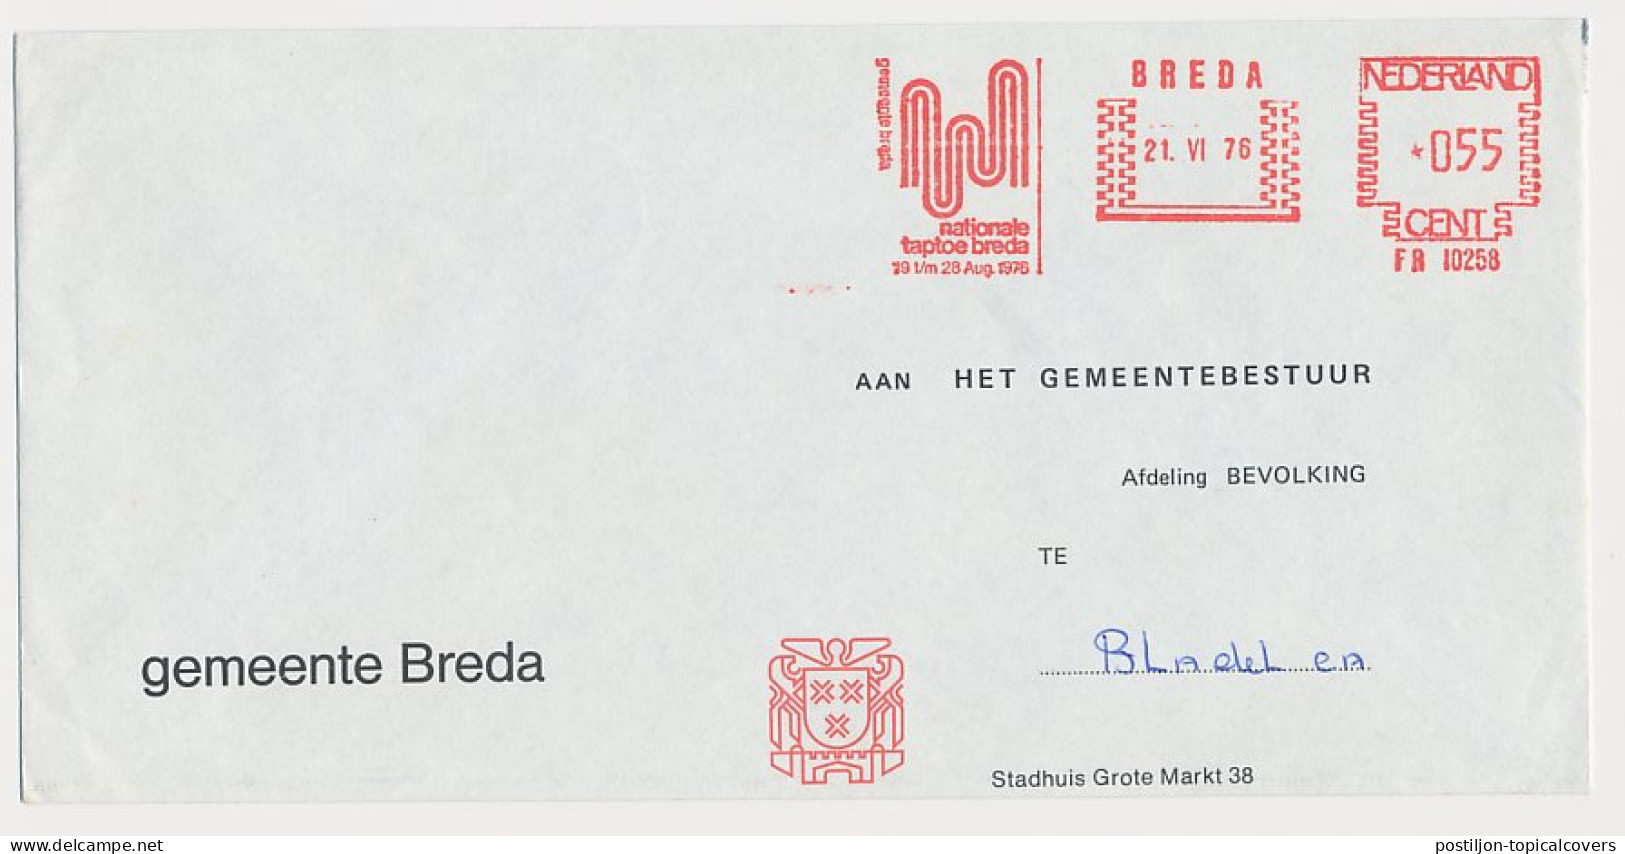 Meter Cover Netherlands 1976 TapToe Breda - Military And Musical Show - Tattoo  - Music